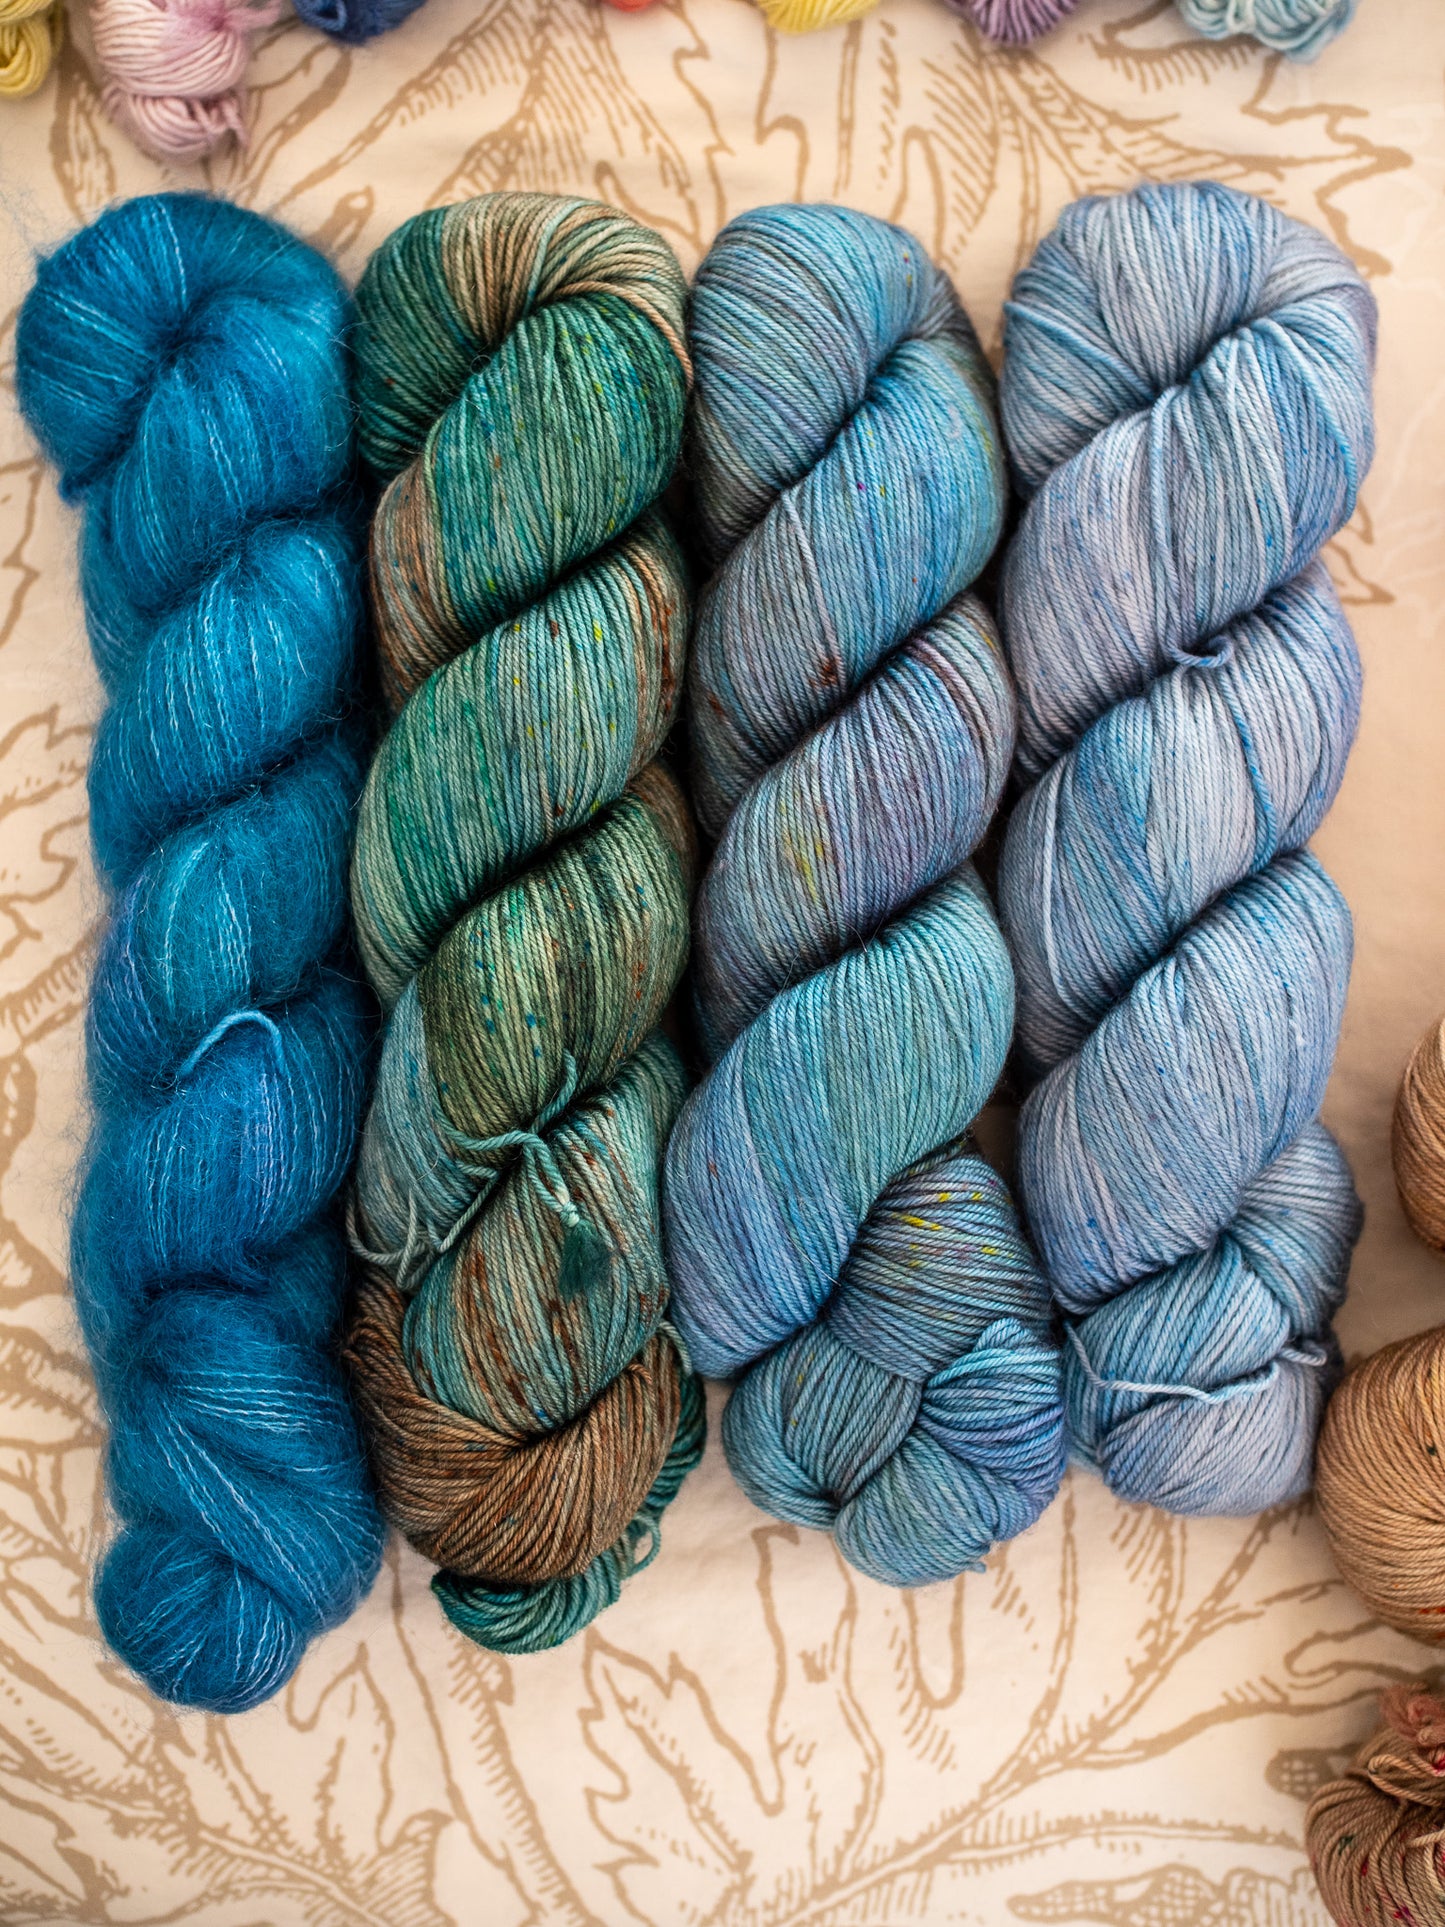 Shawl/Sweater Fade Bundle 21 - Blue lover - Fingering/Lace weight - 1625 Meters